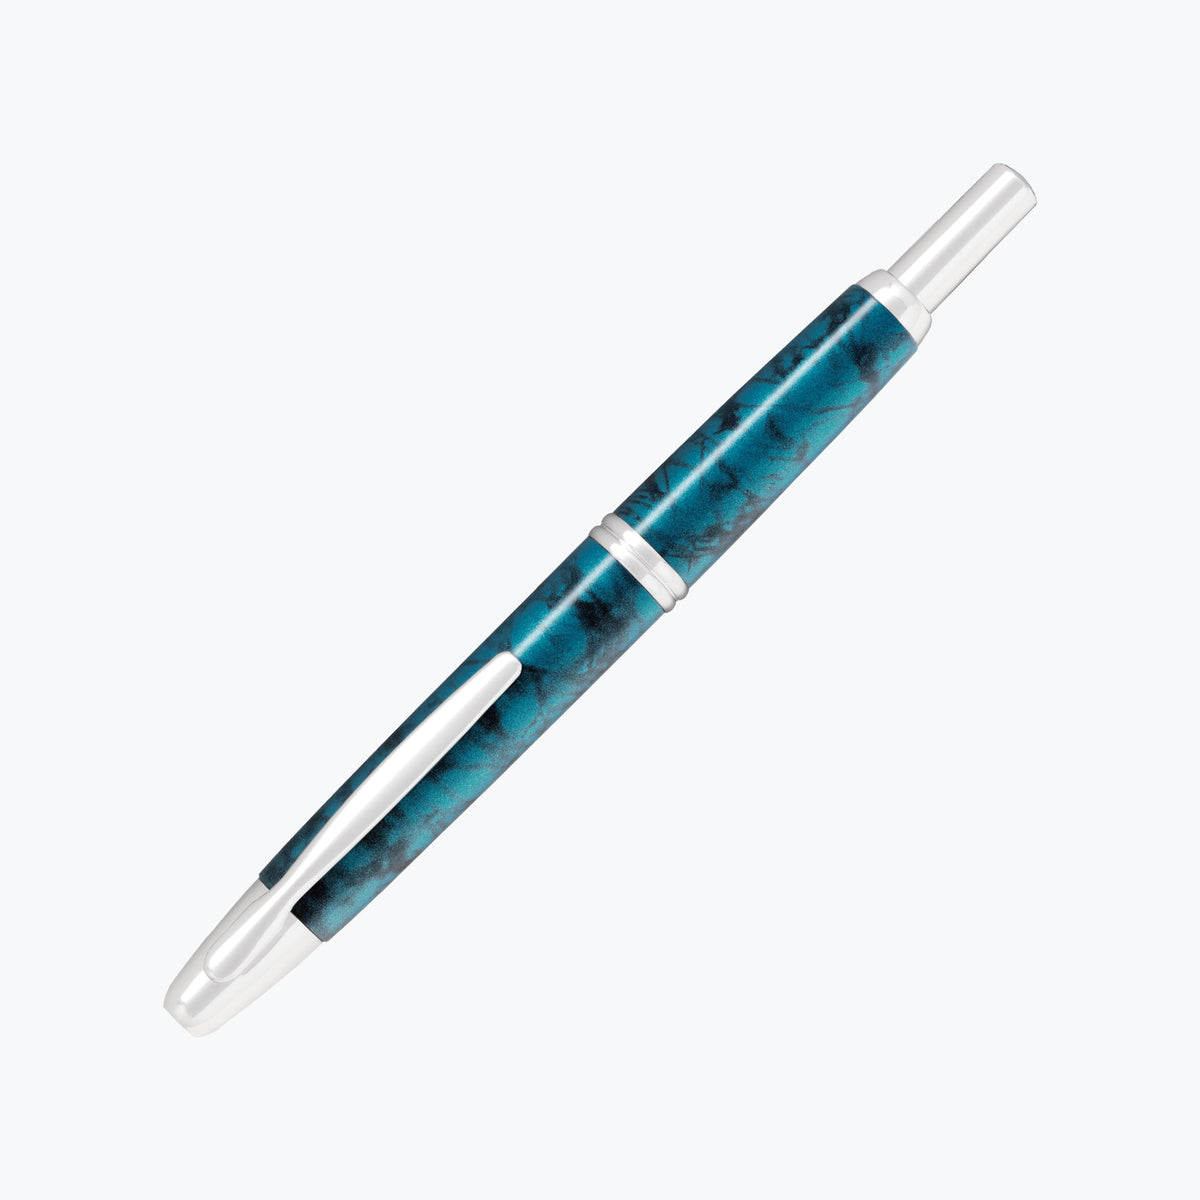 Pilot - Fountain Pen - Capless - Tropical Turquoise (2019 Limited Edition) [SOLD OUT]